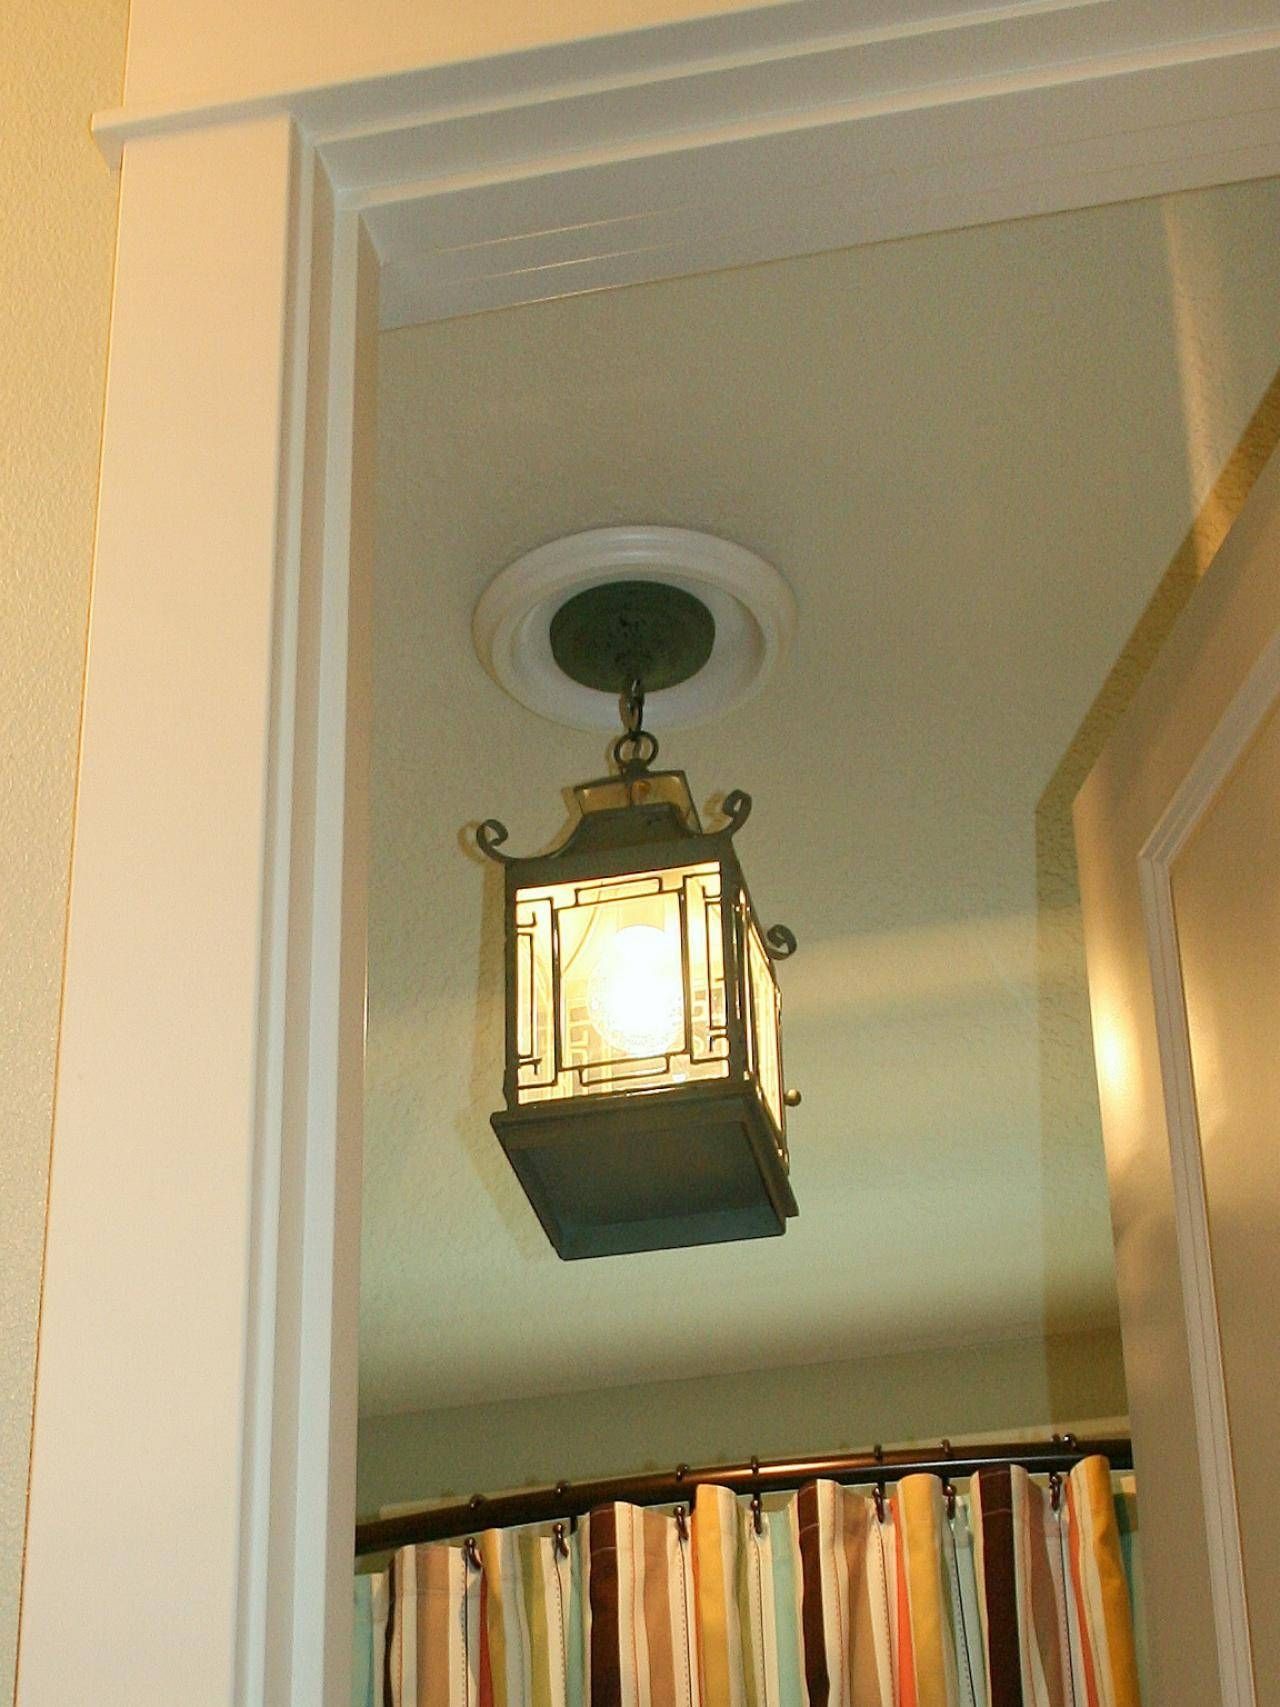 Replace Recessed Light With A Pendant Fixture | Hgtv For Recessed Lighting Pendants (View 9 of 15)